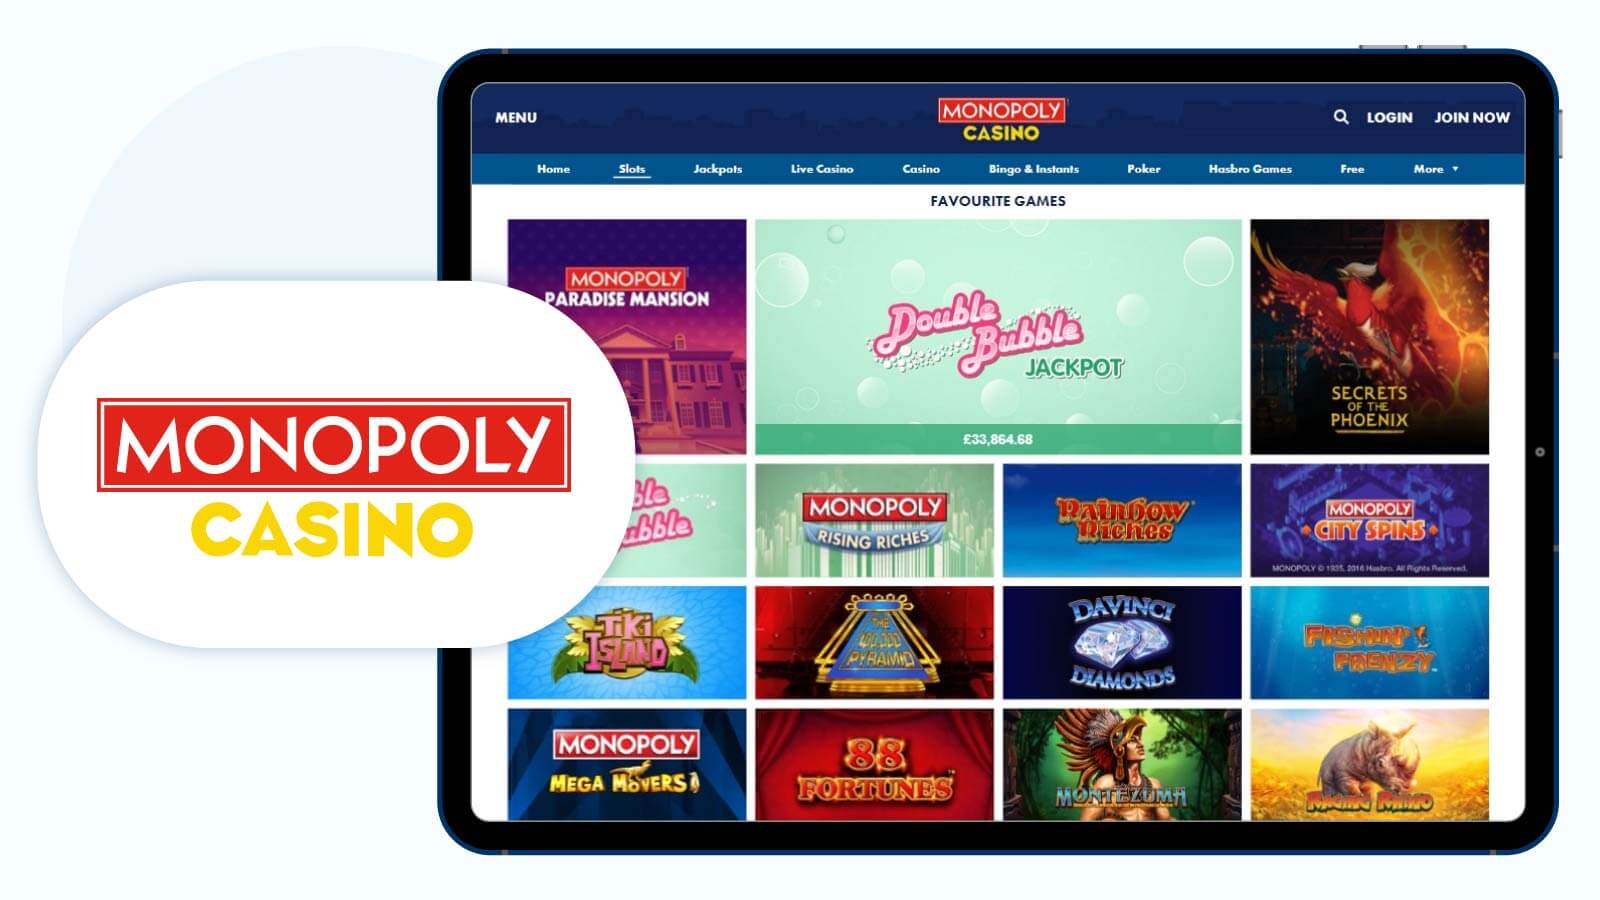 Monopoly-Casino-Featured-Apple-Pay-fast-payout-casino-UK